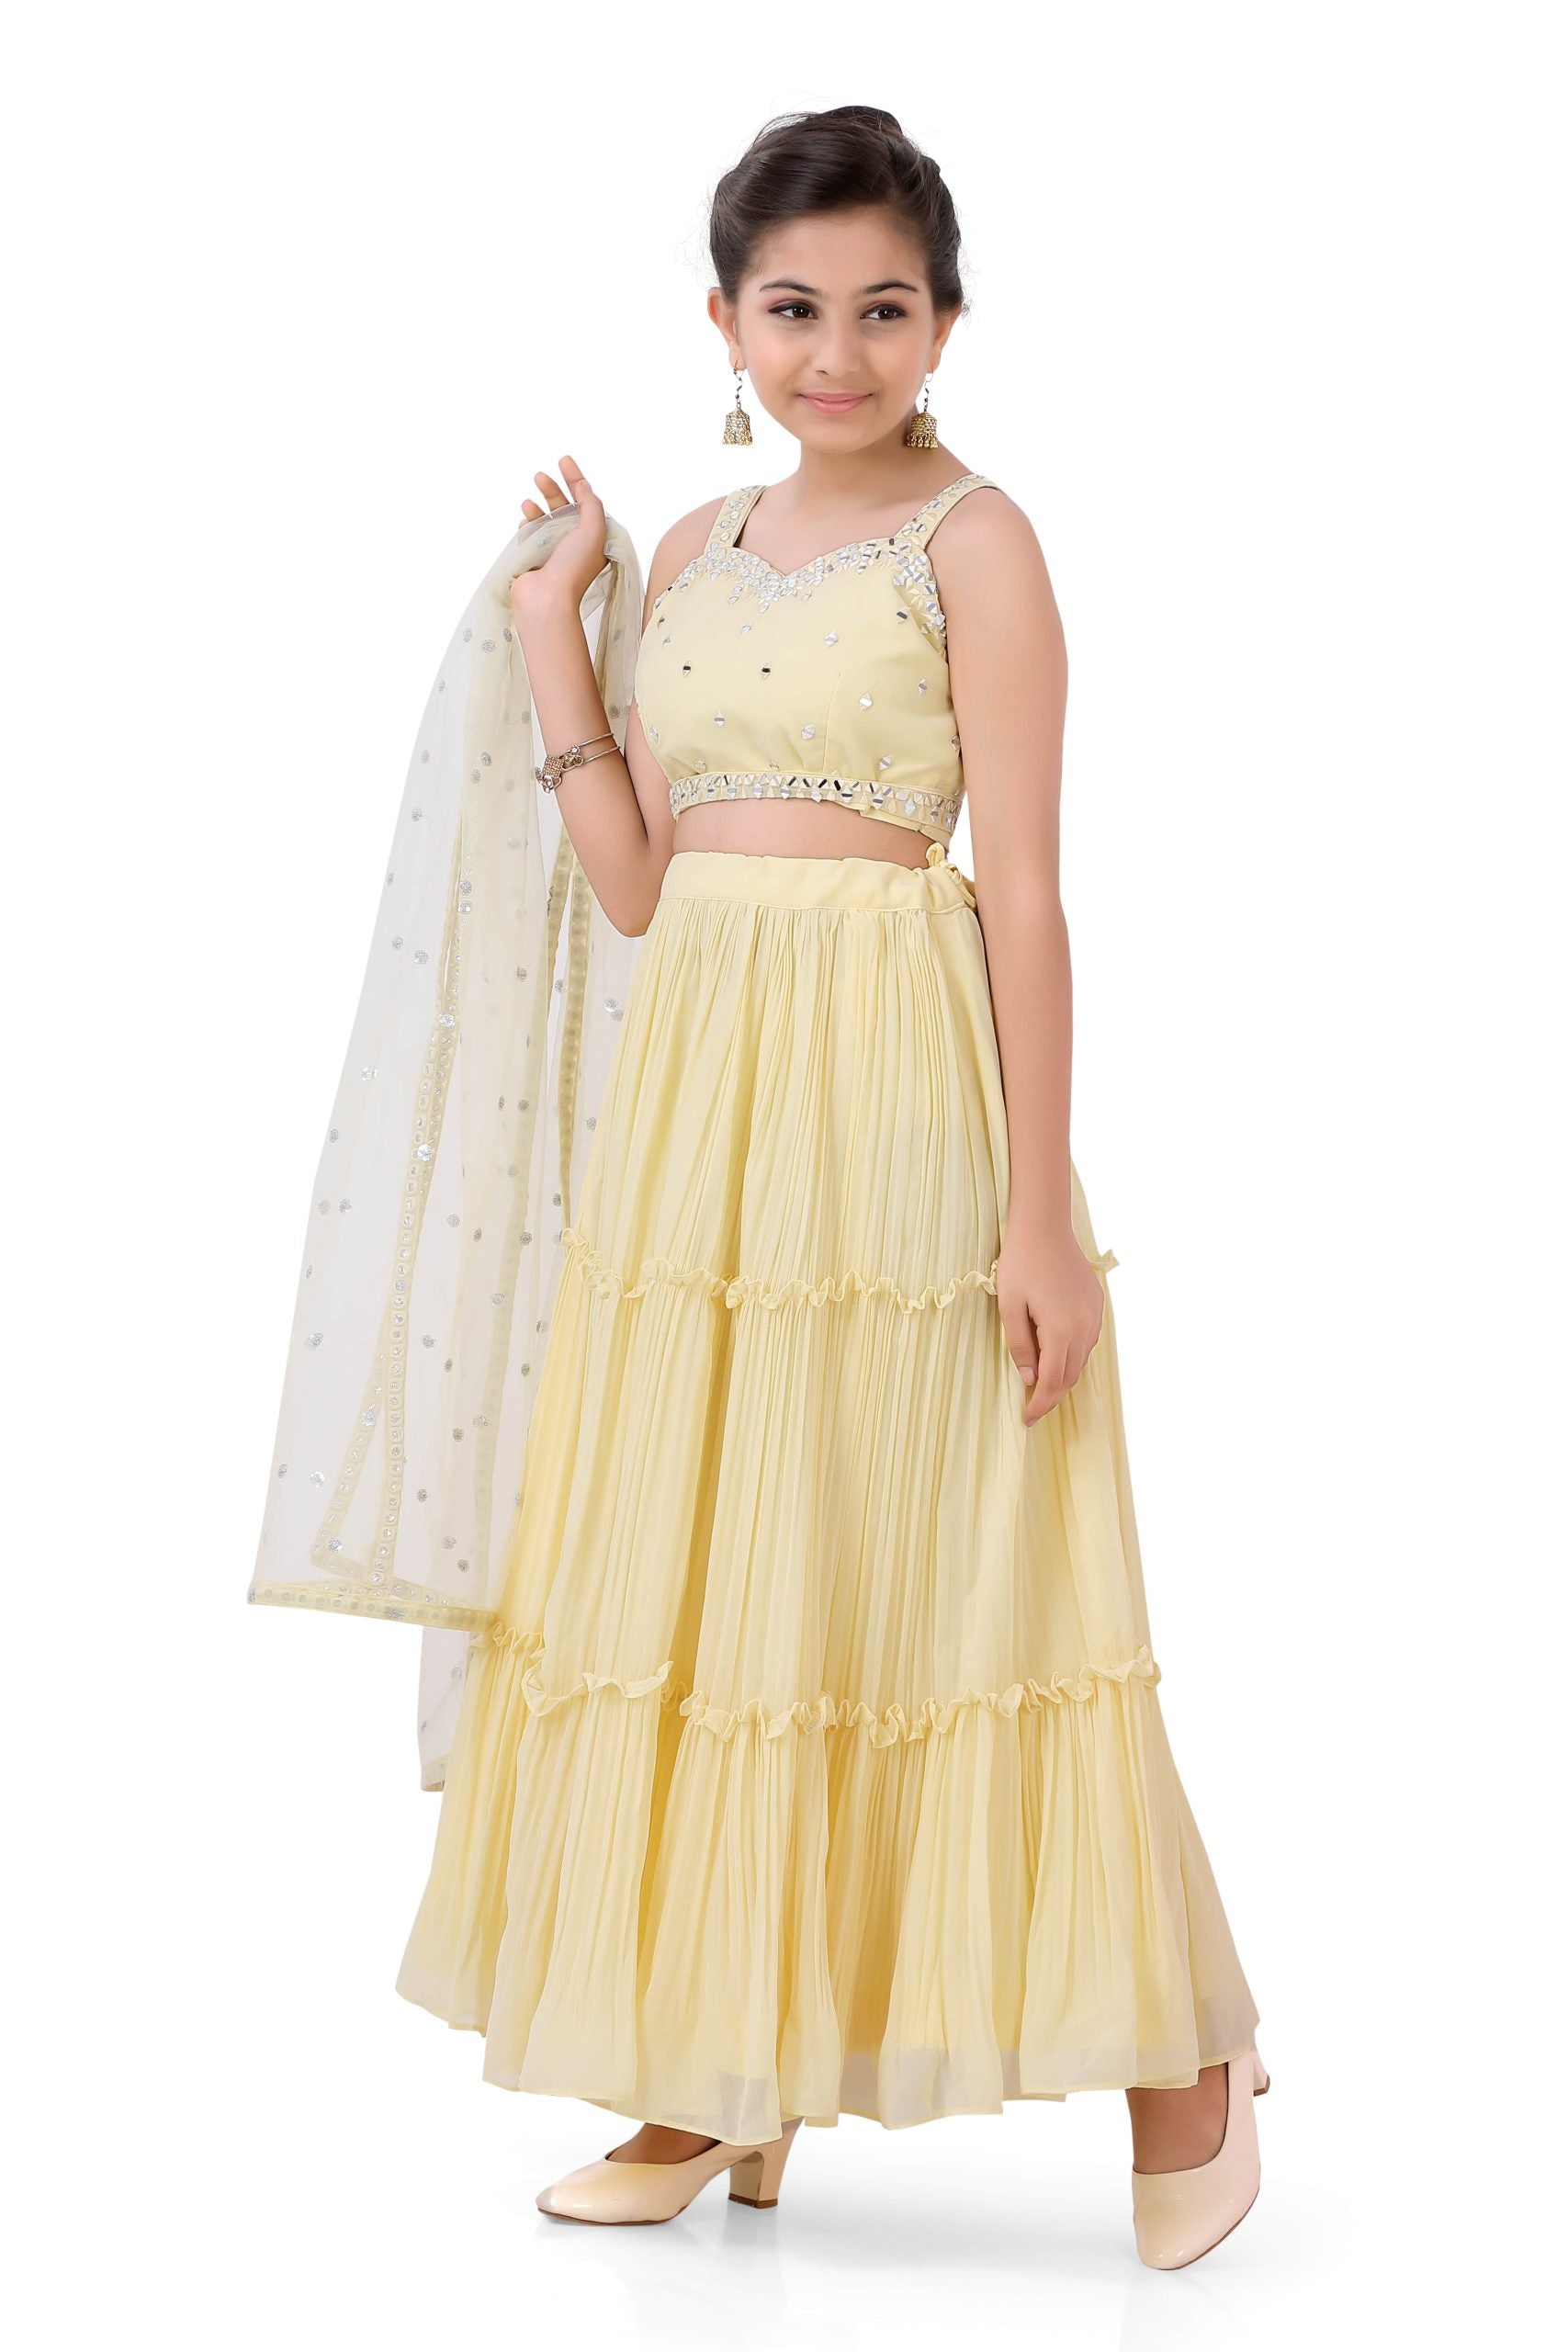 Girls Gazing Ghaghra Choli in Lemon Yellow - Premium partywear ghaghra from Dulhan Exclusives - Just $99! Shop now at Dulhan Exclusives